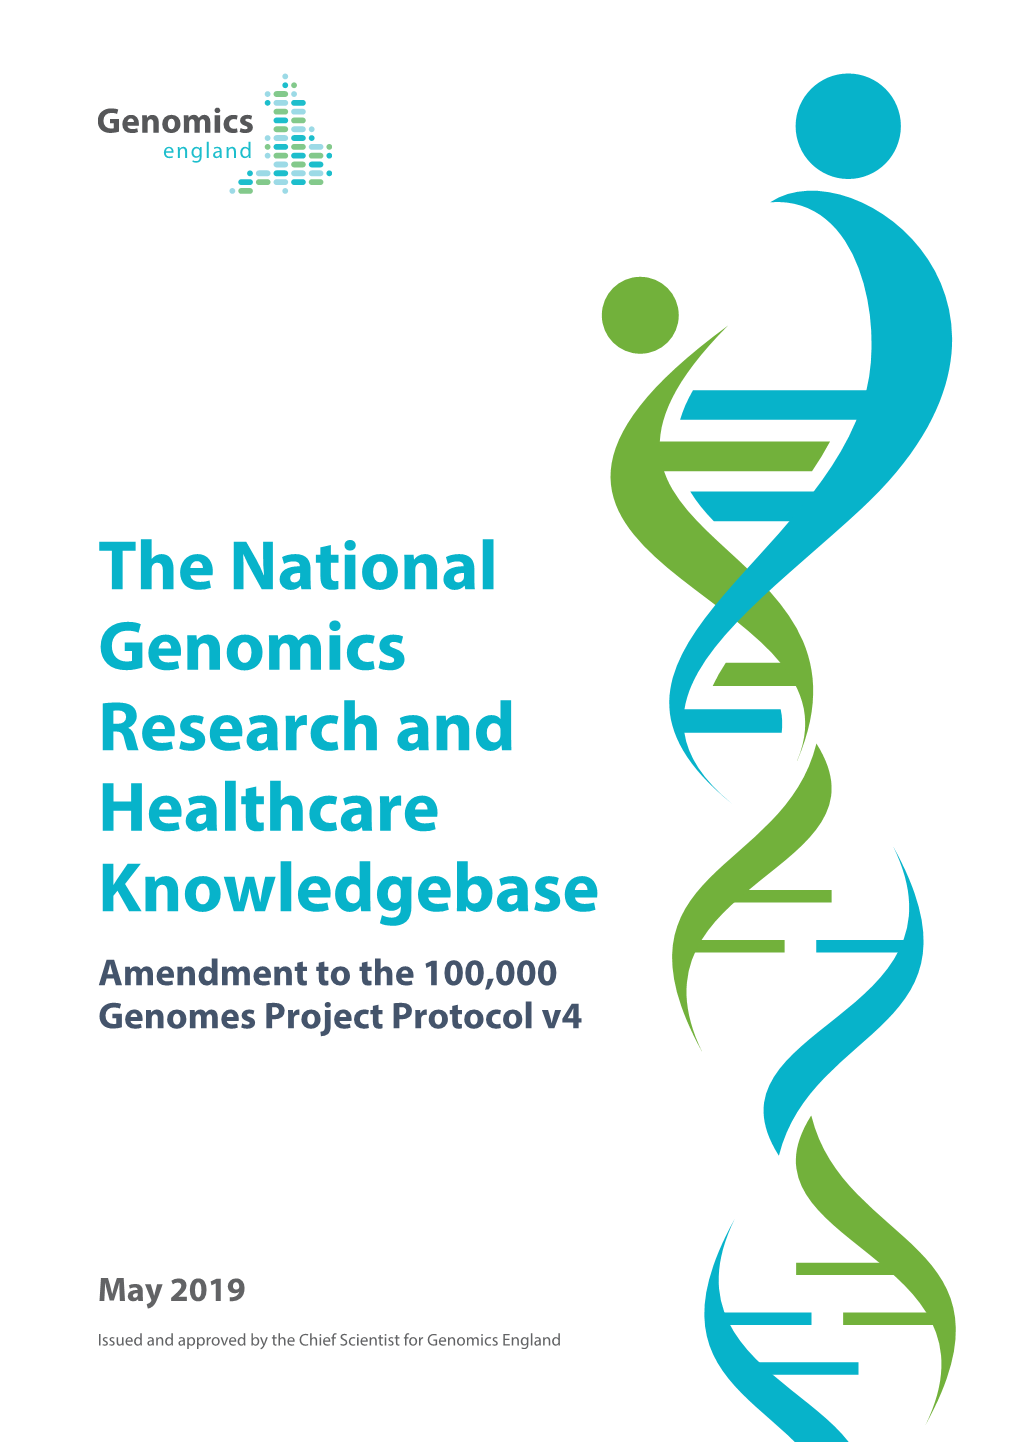 The National Genomics Research and Healthcare Knowledgebase Amendment to the 100,000 Genomes Project Protocol V4